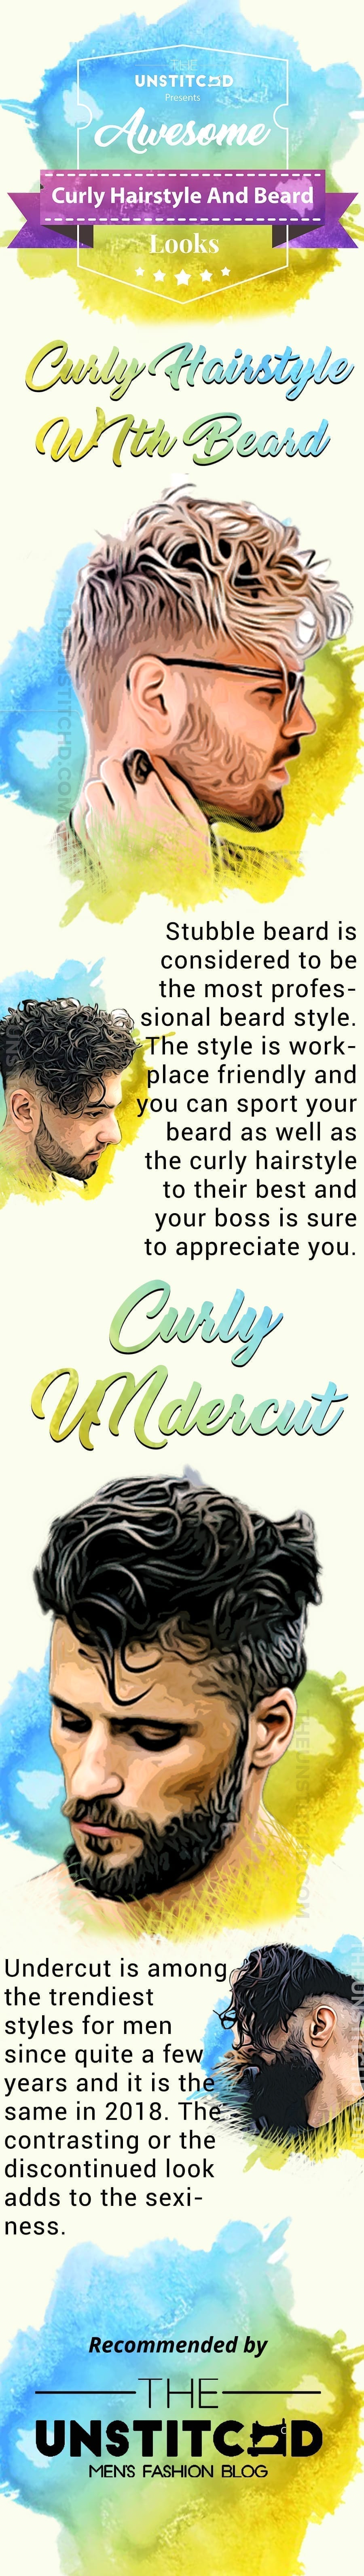 Curly-hairstyle-with-beard-info